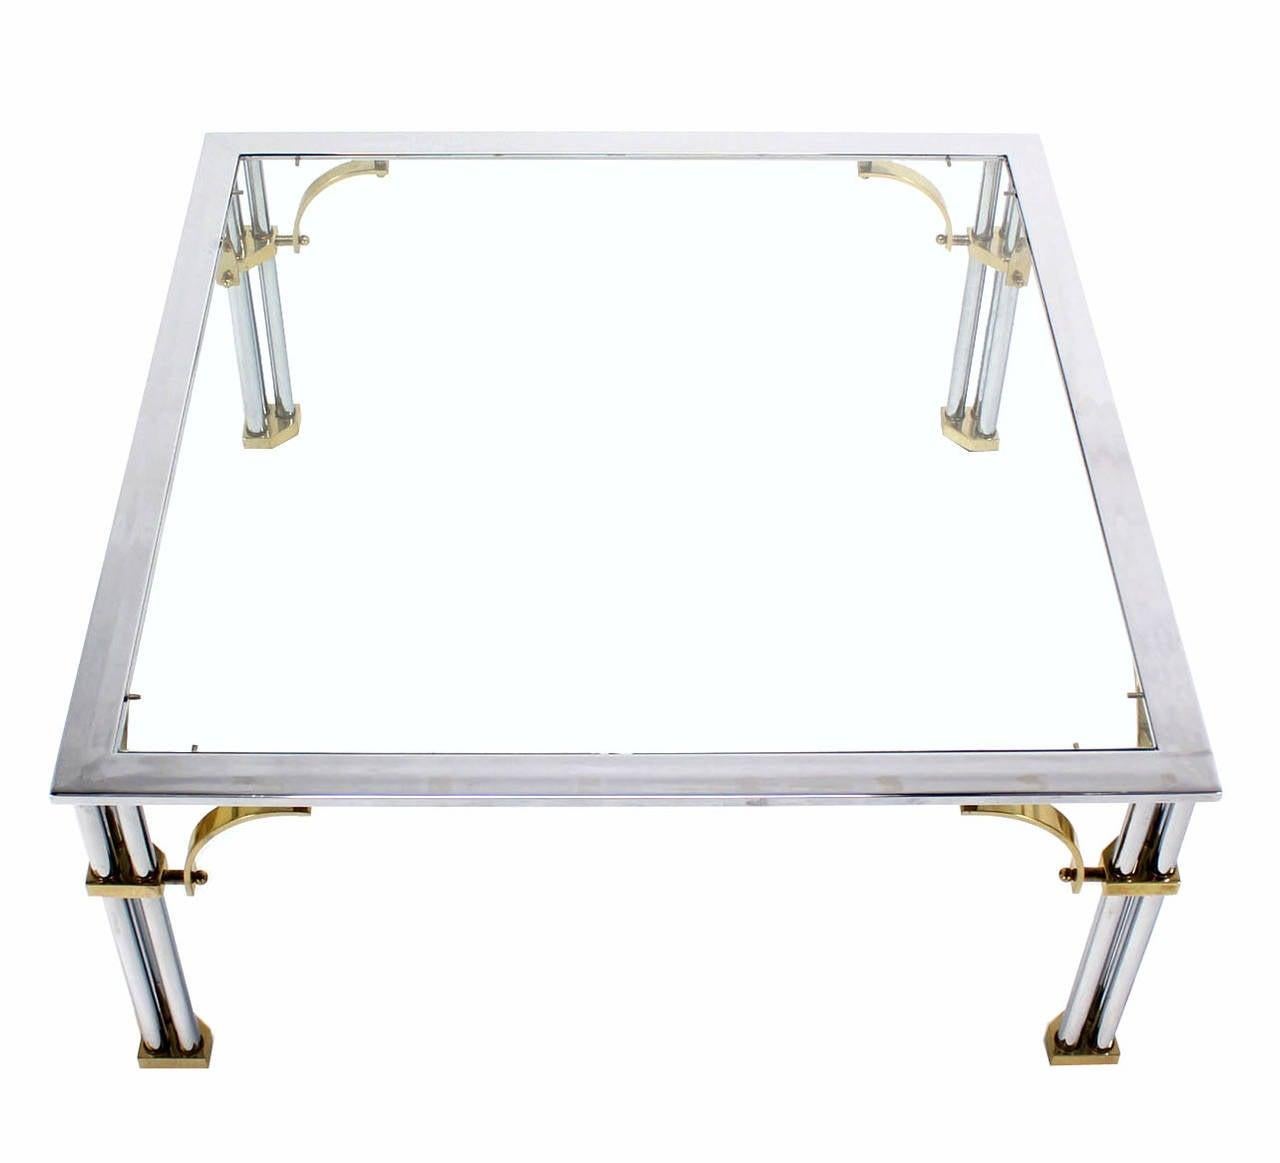 Italian Mid Century Modern Brass Chrome Glass Top Square Coffee Table MINT For Sale 1